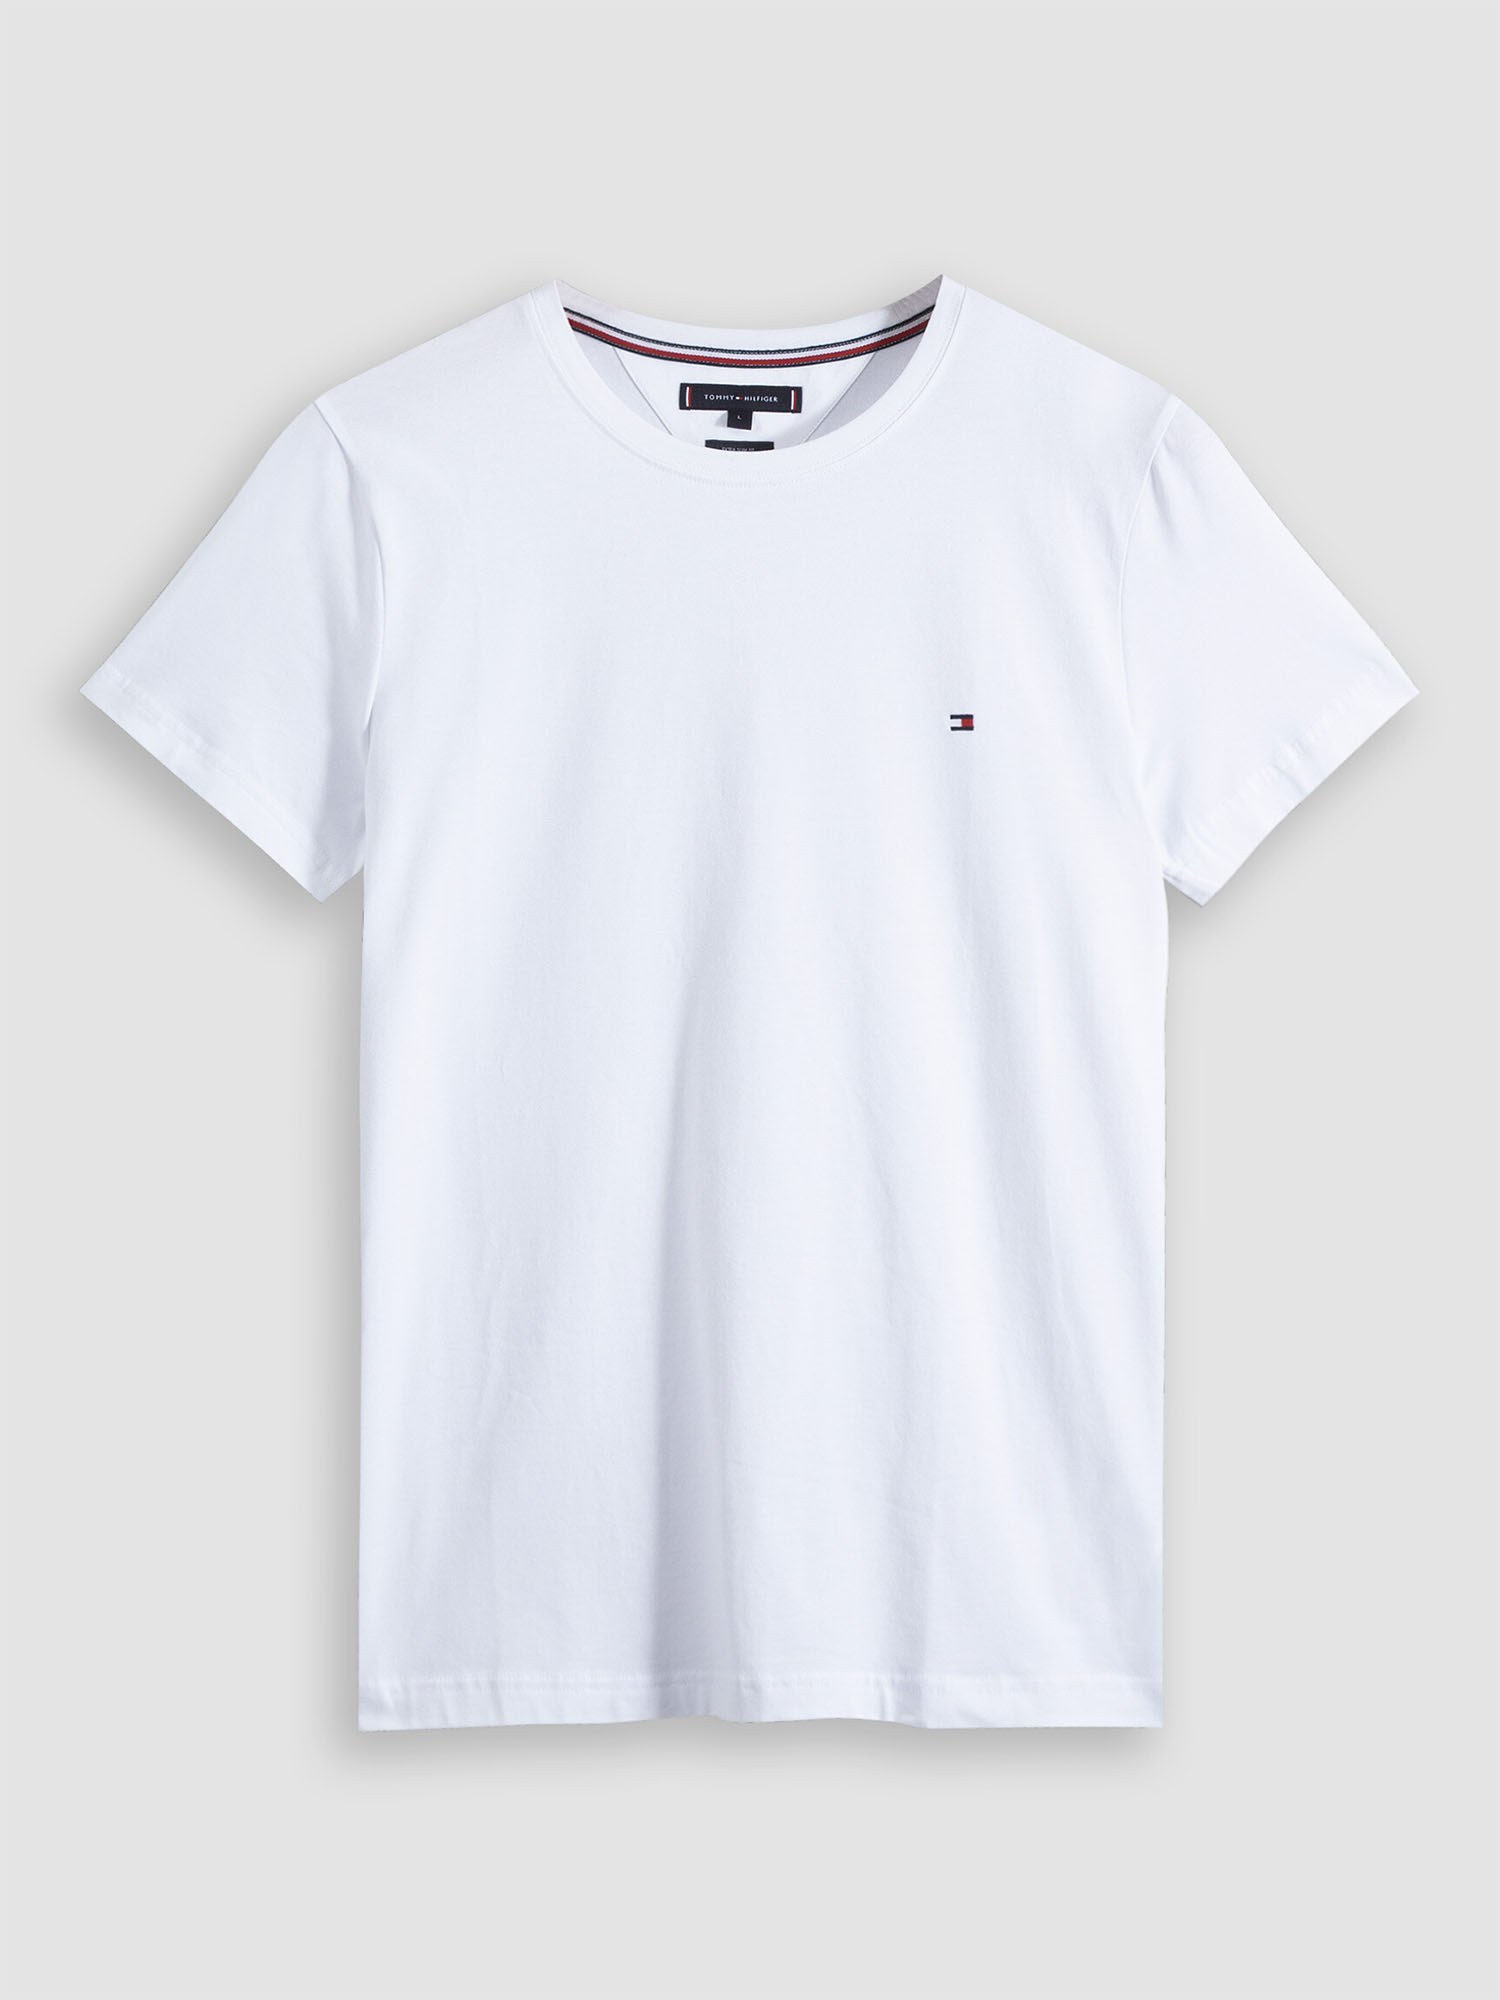 T-SHIRT UOMO TOMMY JEANS IN COTONE - BIANCO